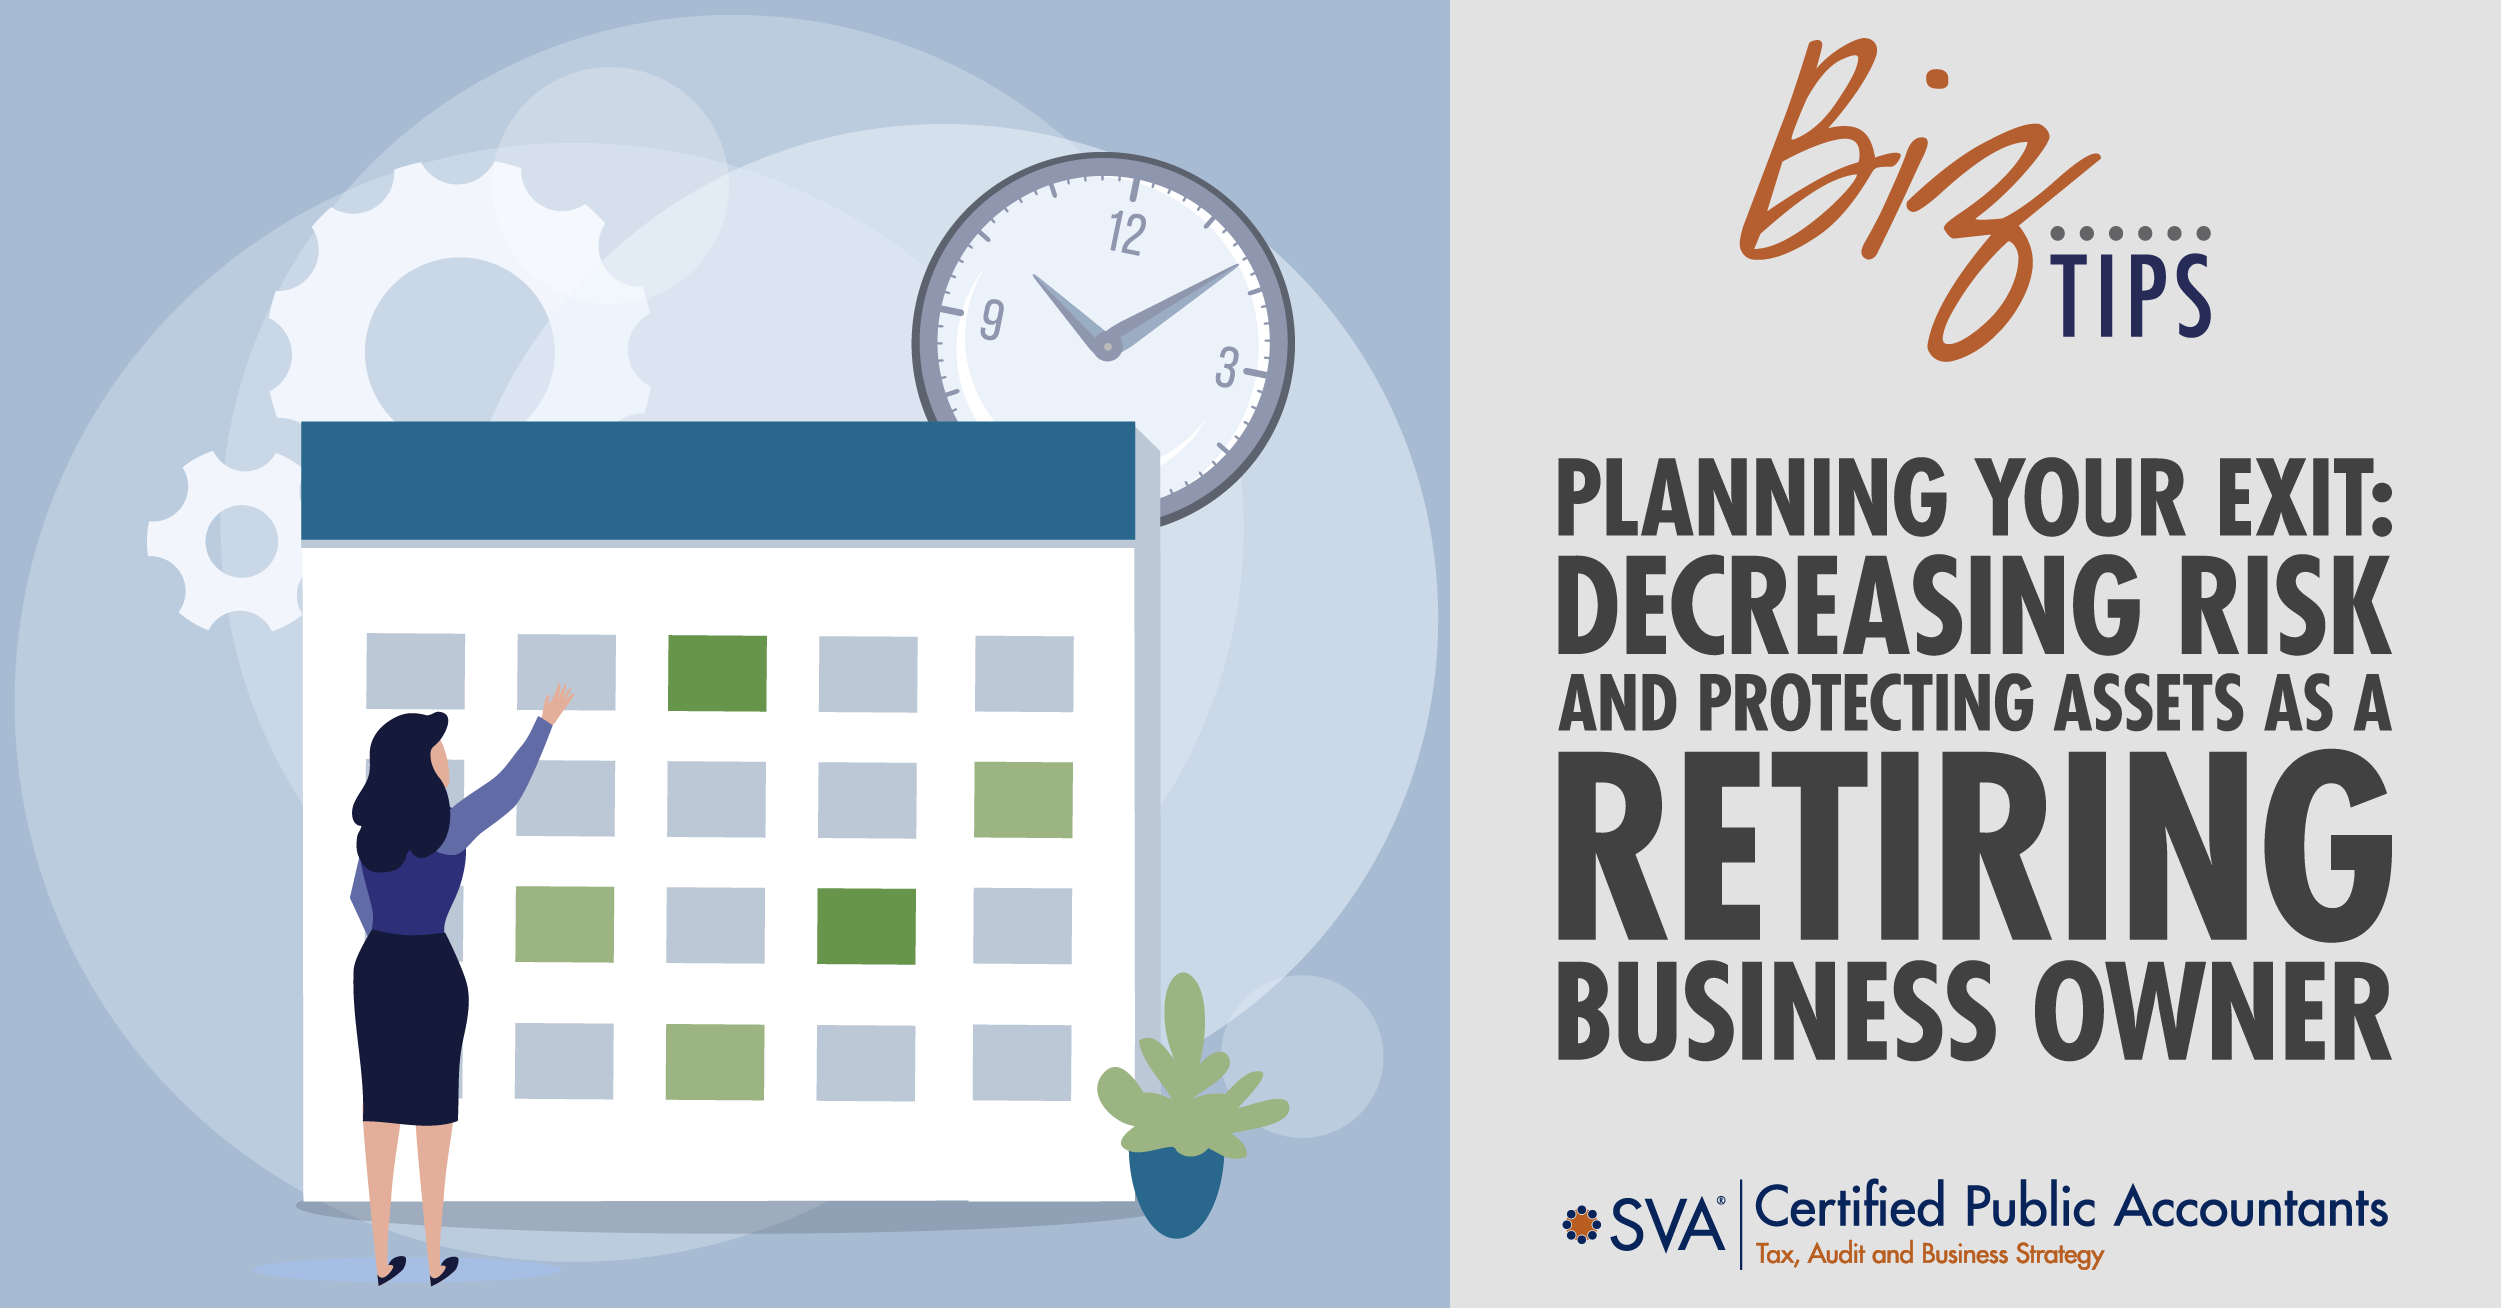 Planning Your Exit: Decreasing Risk and Protecting Assets as a Retiring Business Owner